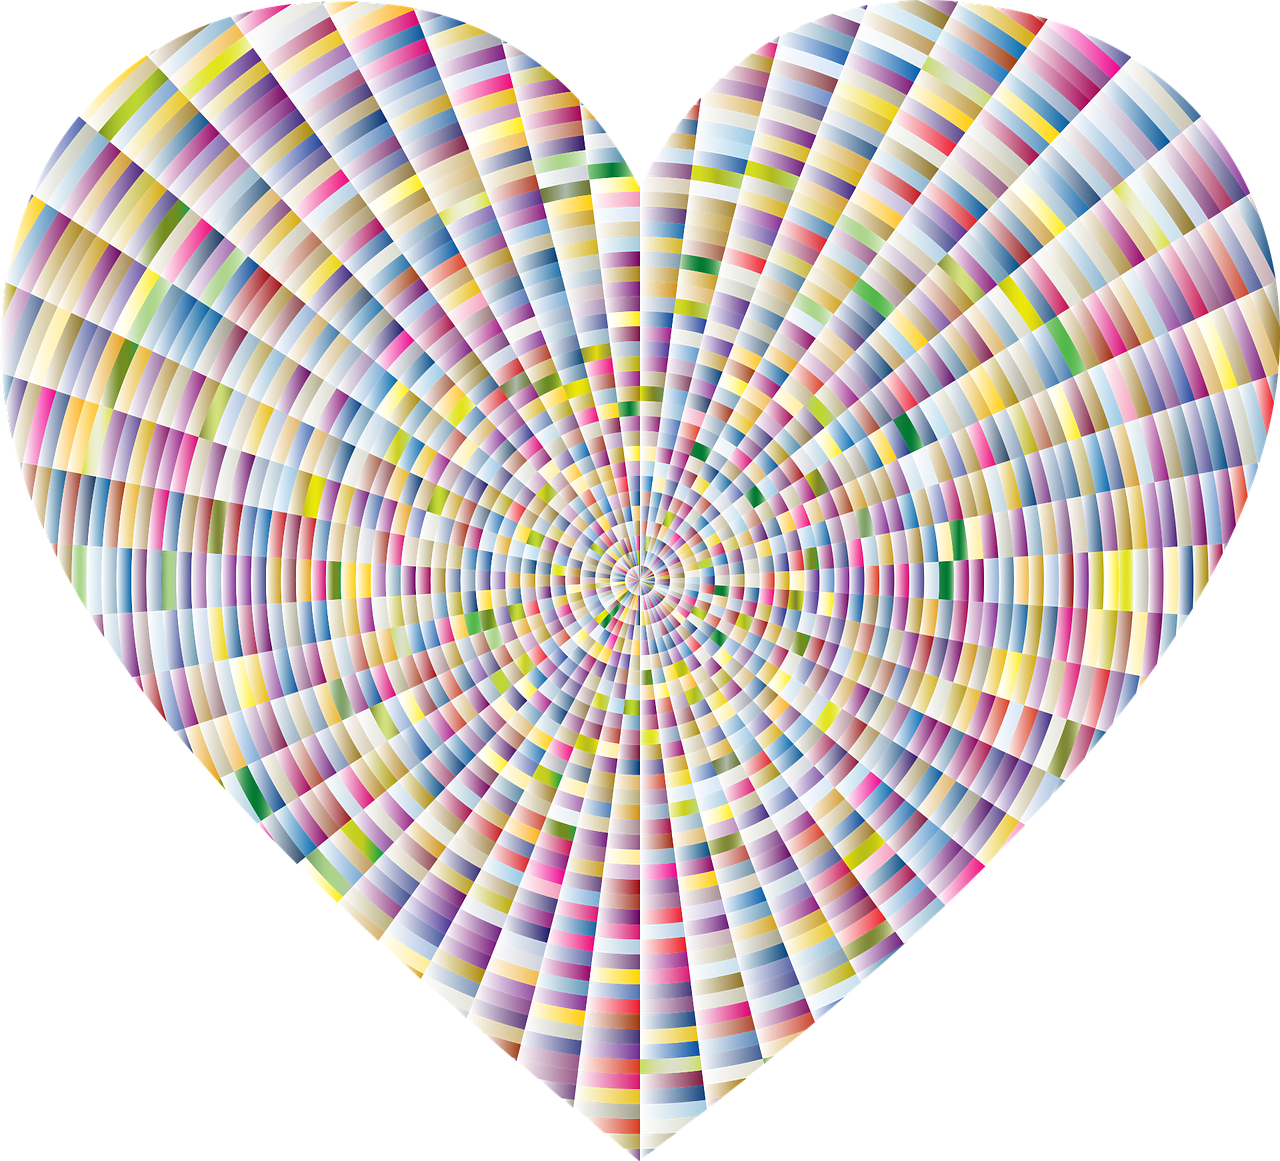 a multicolored heart on a black background, a mosaic, abstract illusionism, radial, sana takeda, dynamic!!, vibration